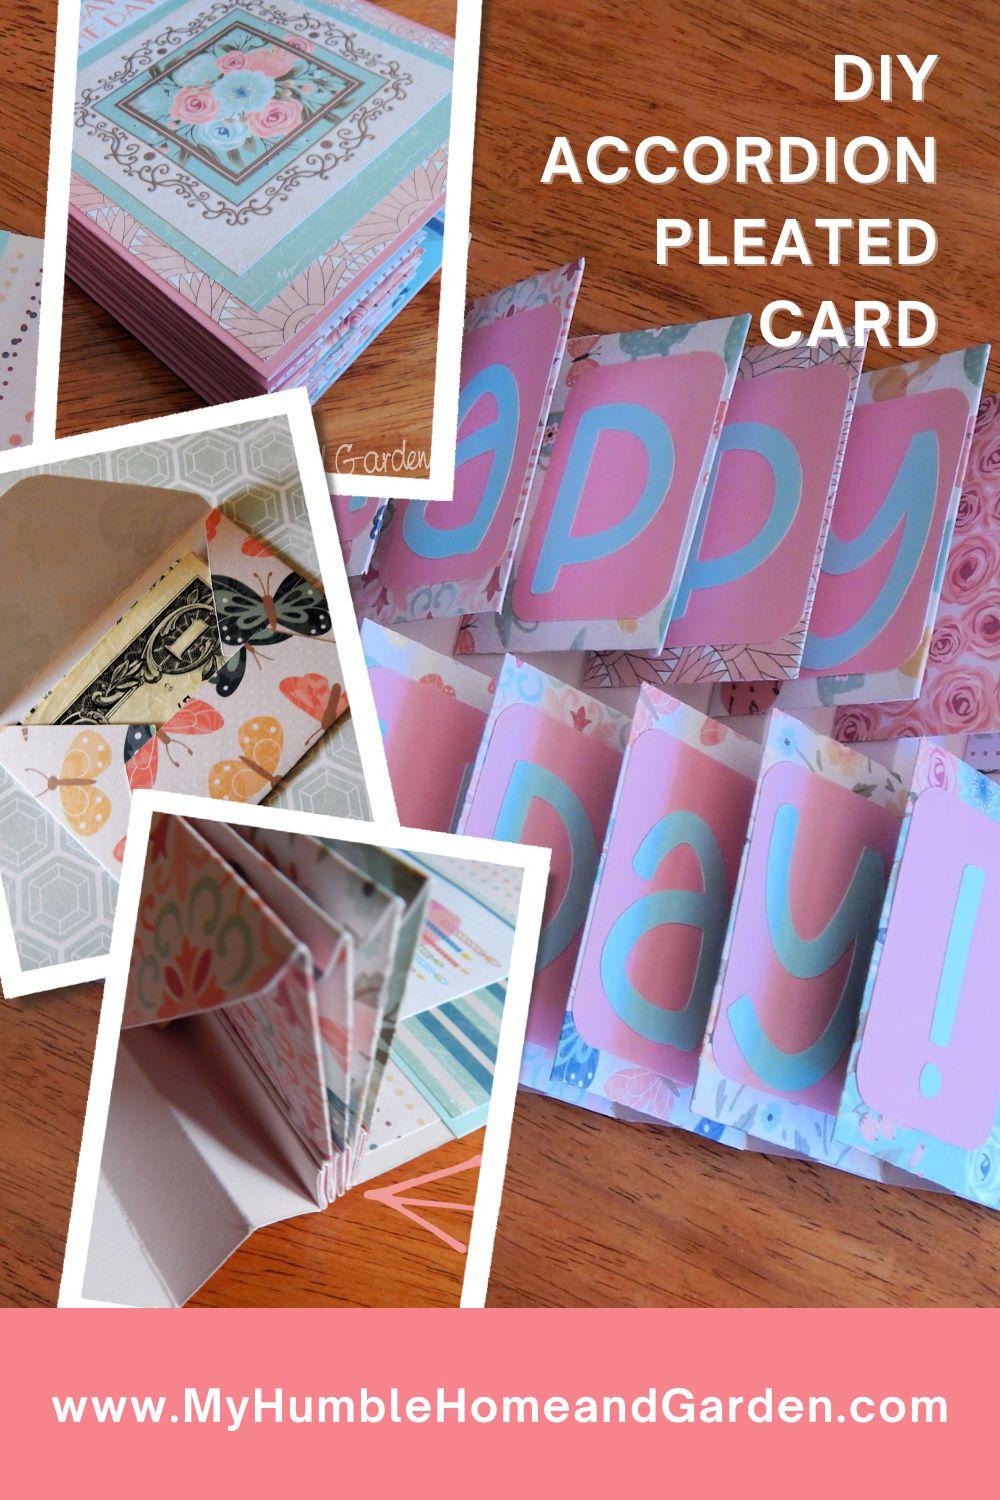 Get Noticed: 7 Craft & Design Ideas For Red Cardstock Paper That Grab  Attention